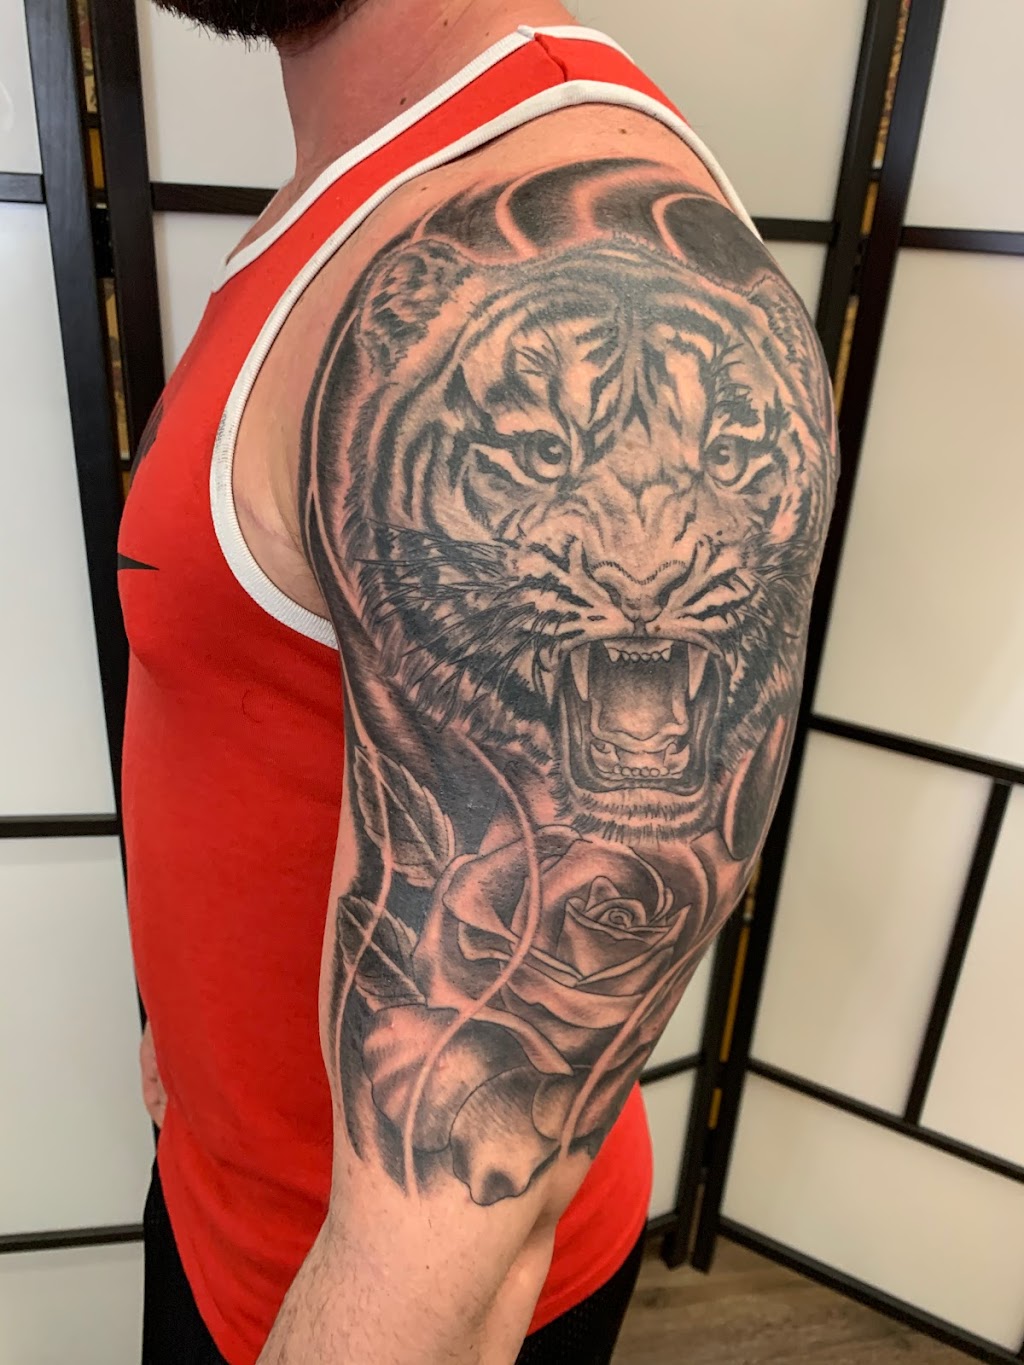 Permanent Vacation Tattoo | 3130 W Clay St, St Charles, MO 63301 | Phone: (636) 896-4449